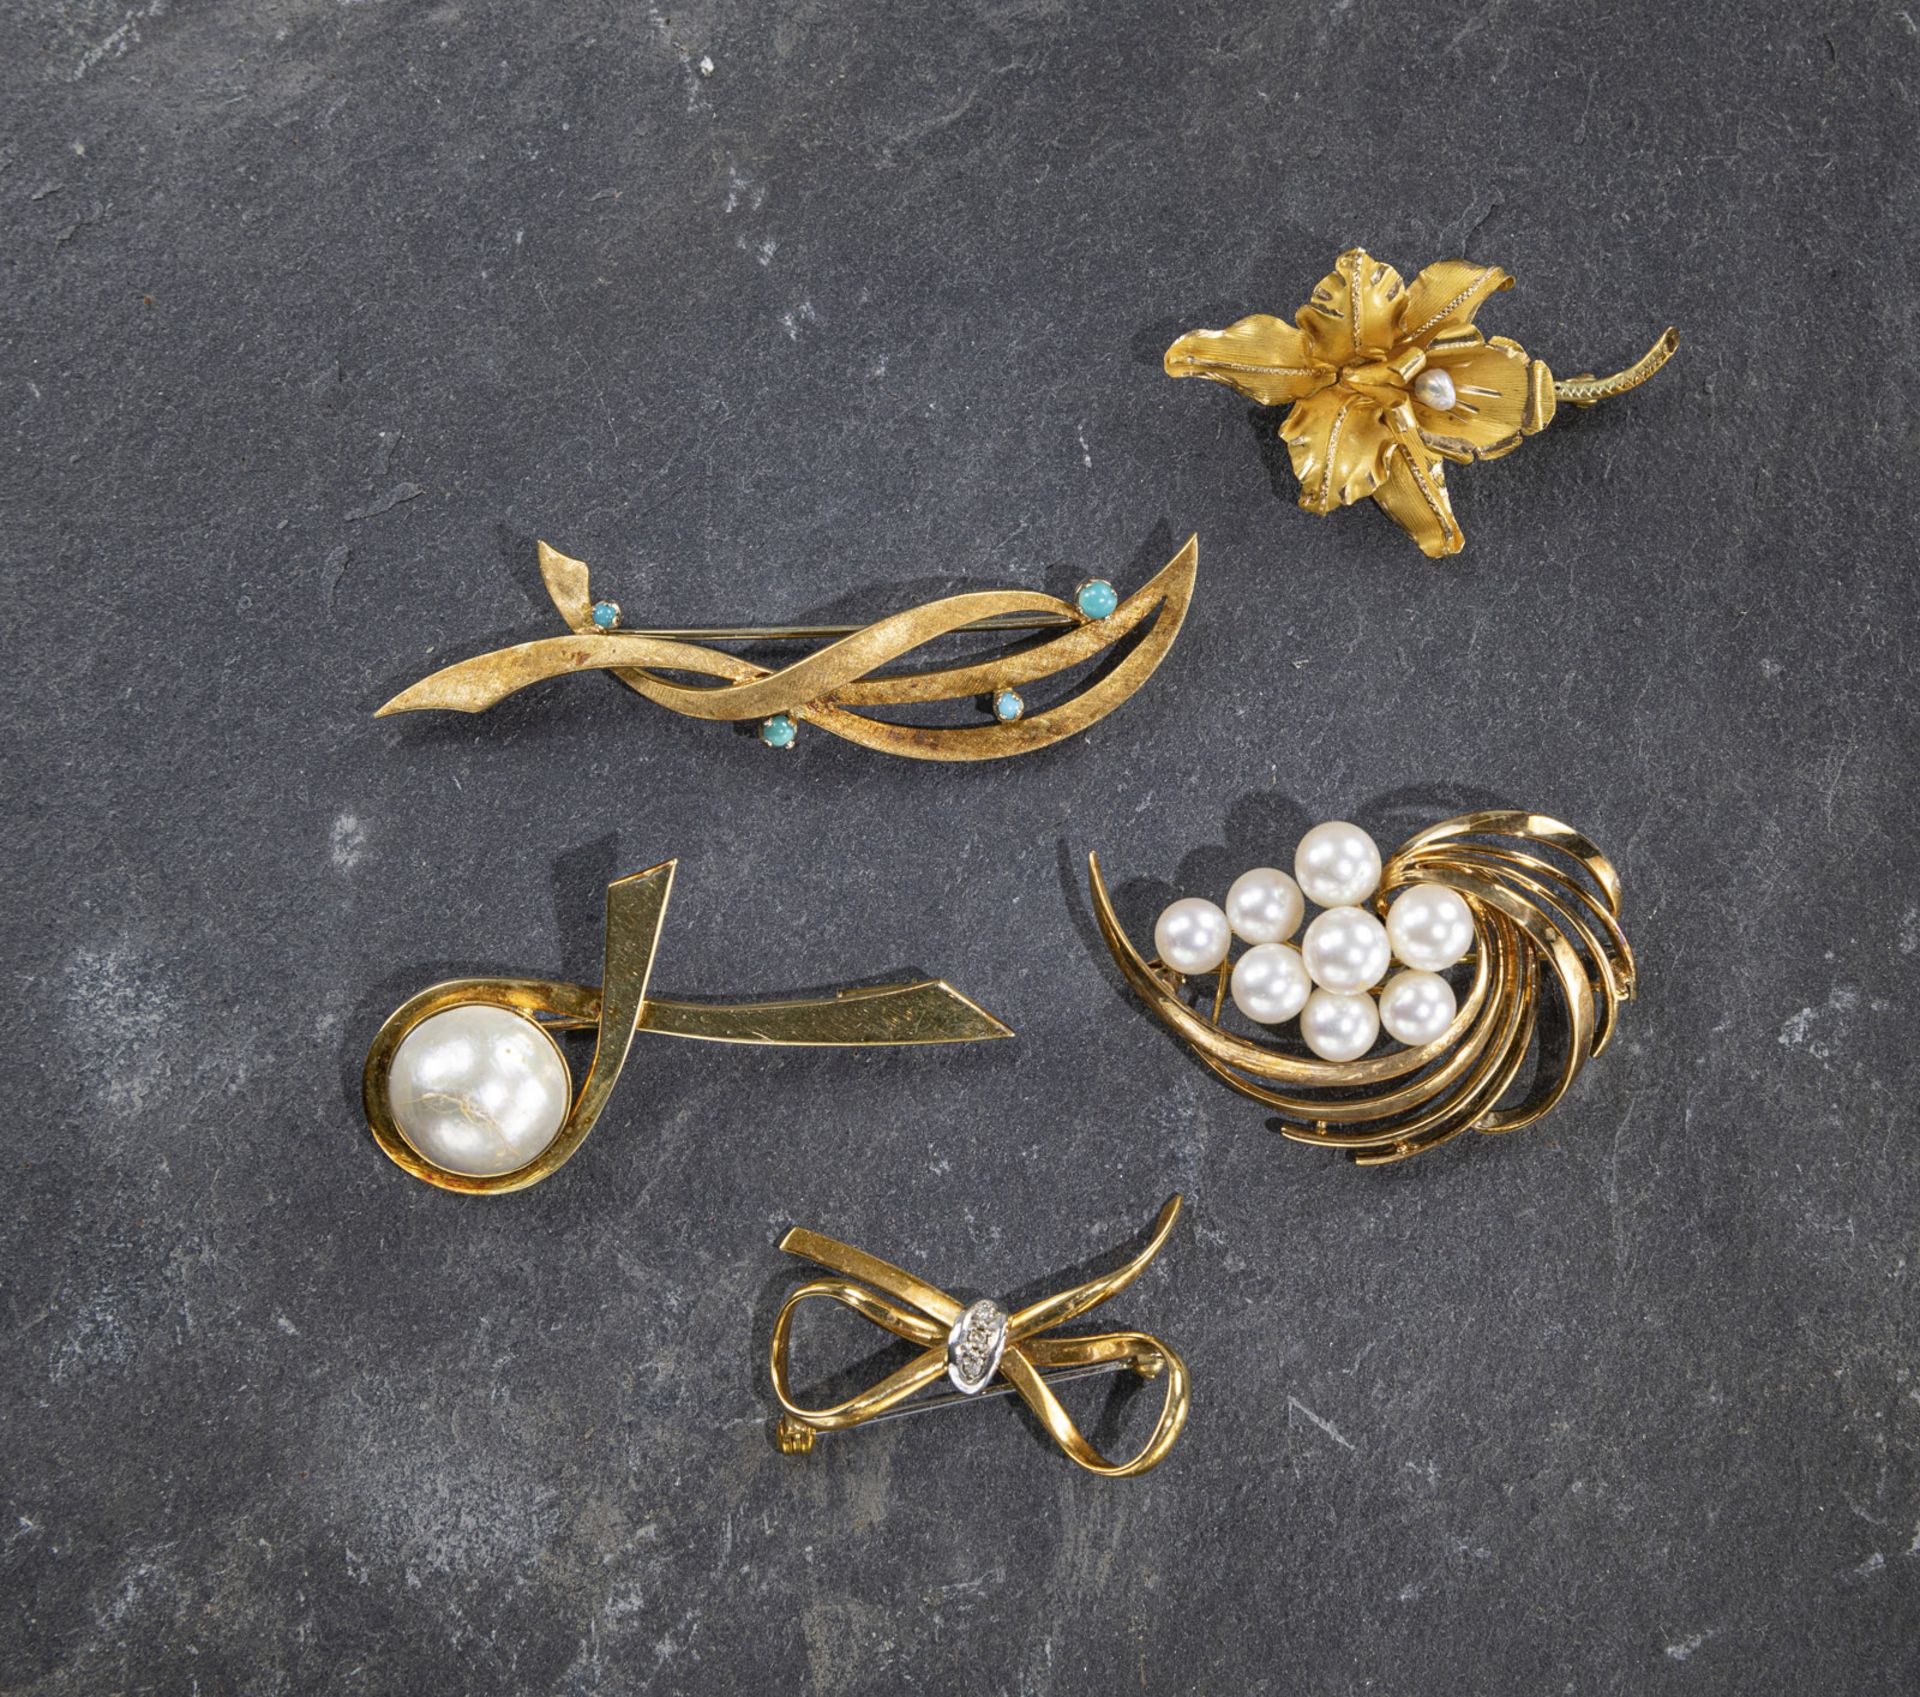 FIVE GOLD BROOCHES